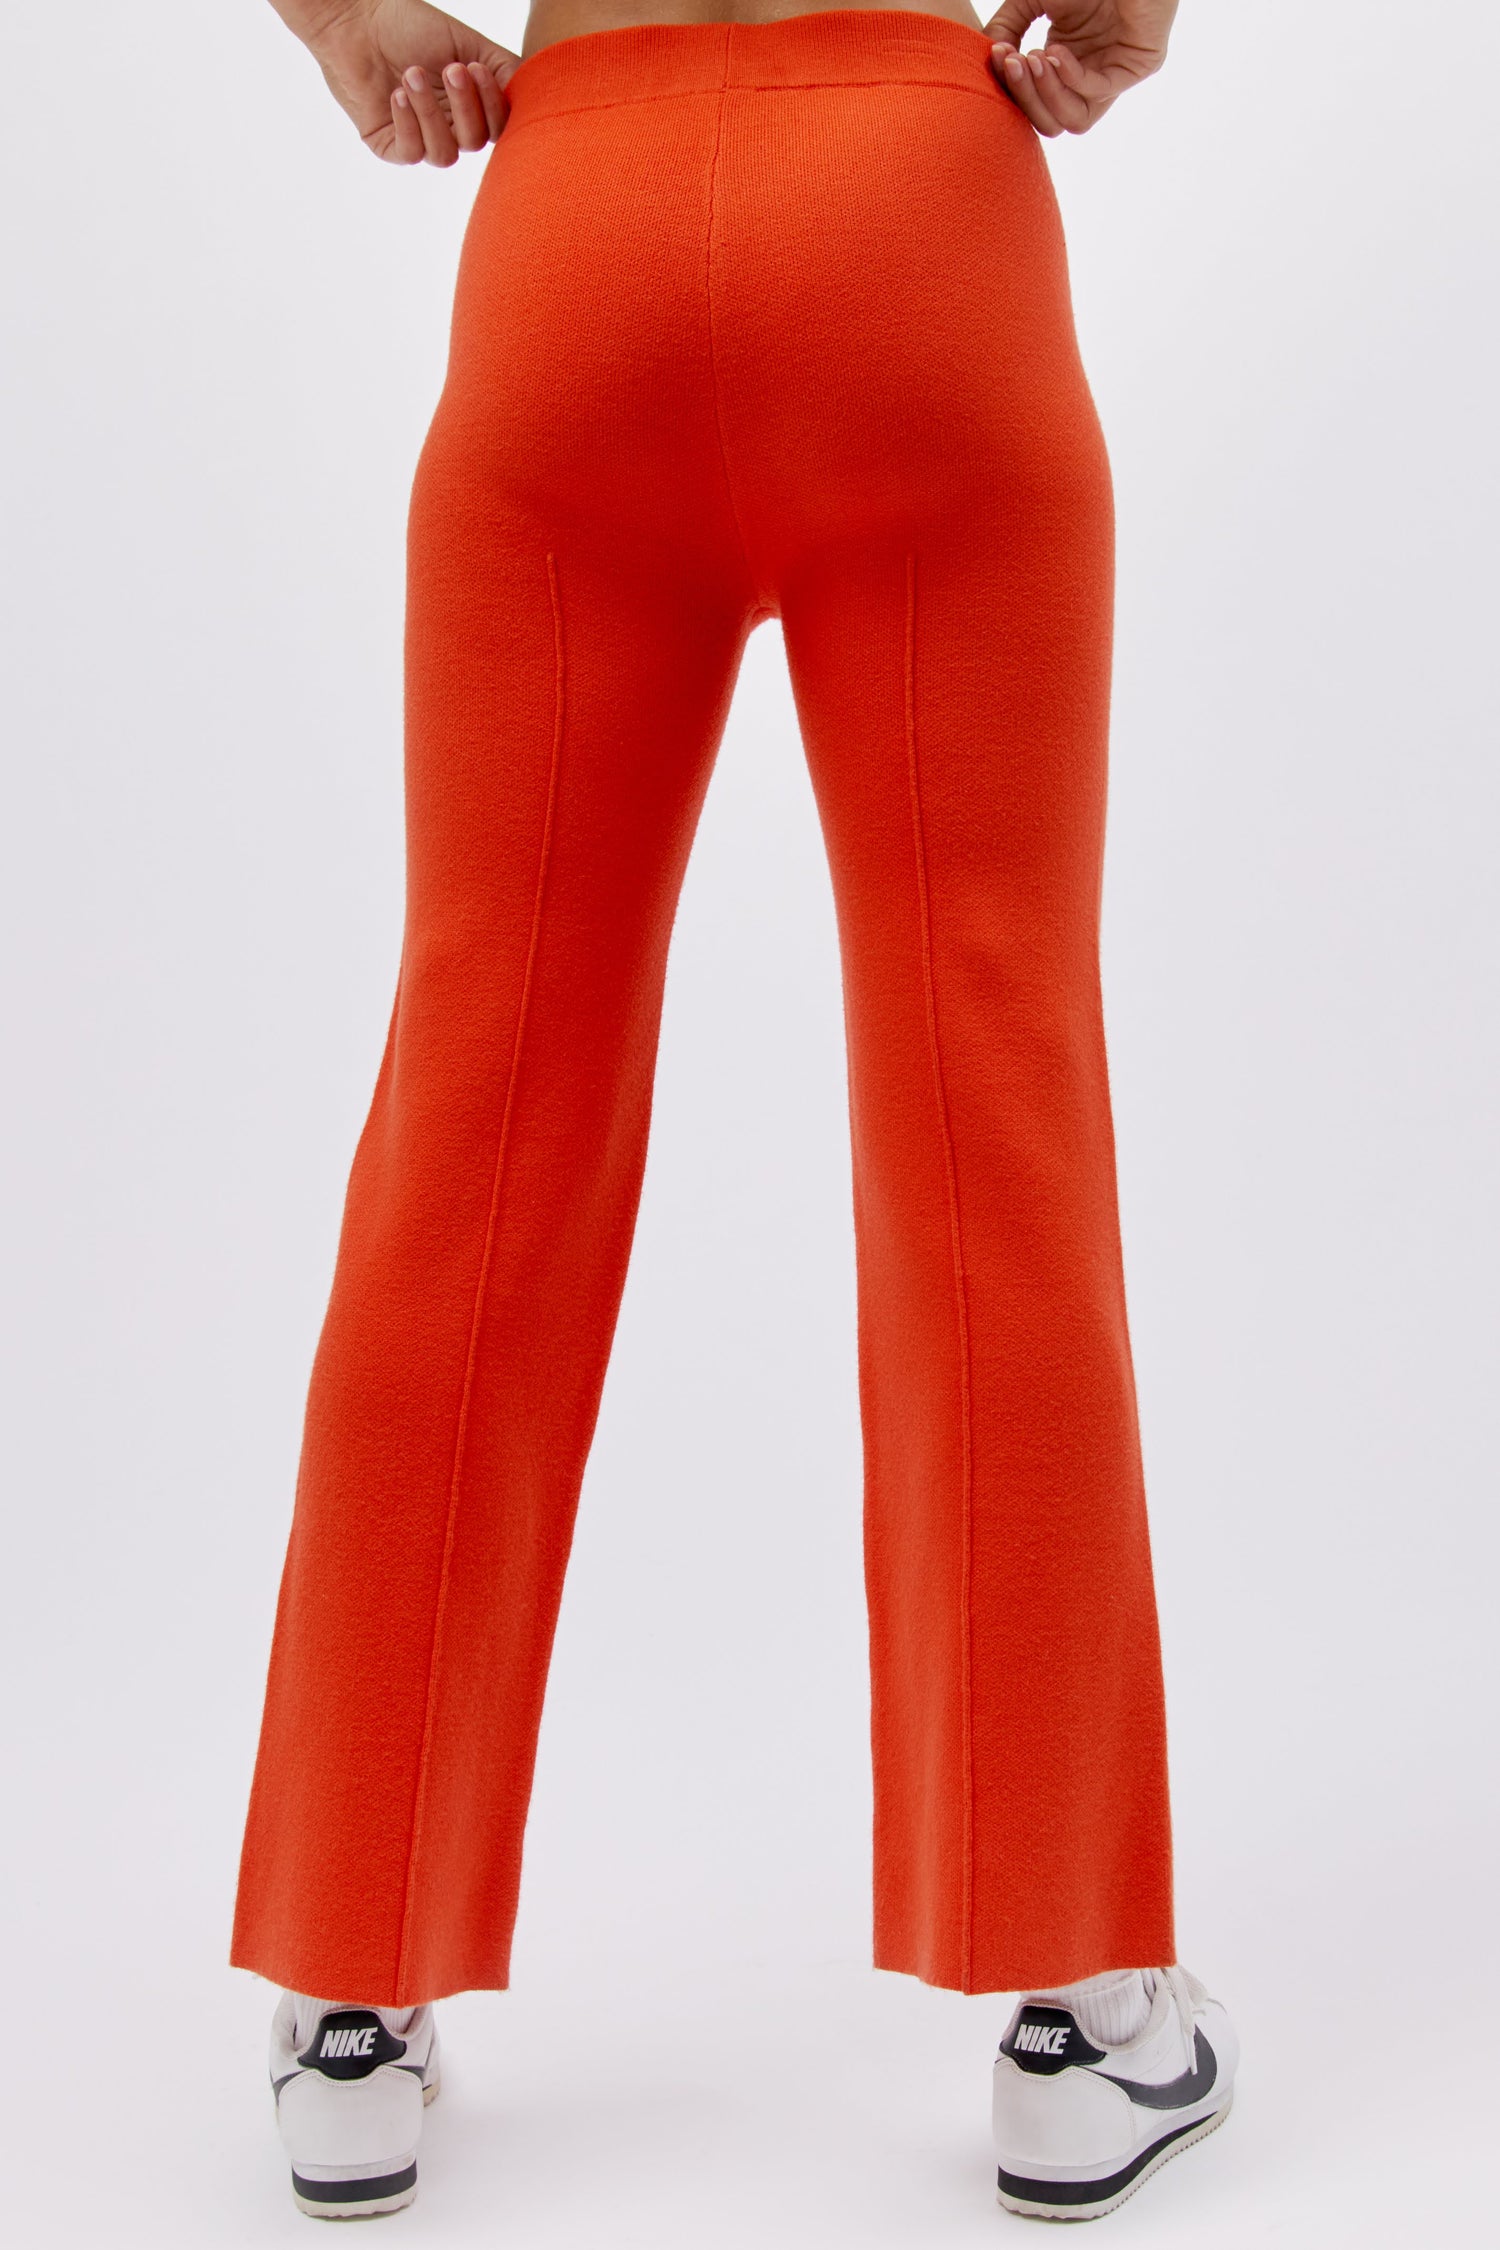 A model featuring a hot orange pintuck pant.